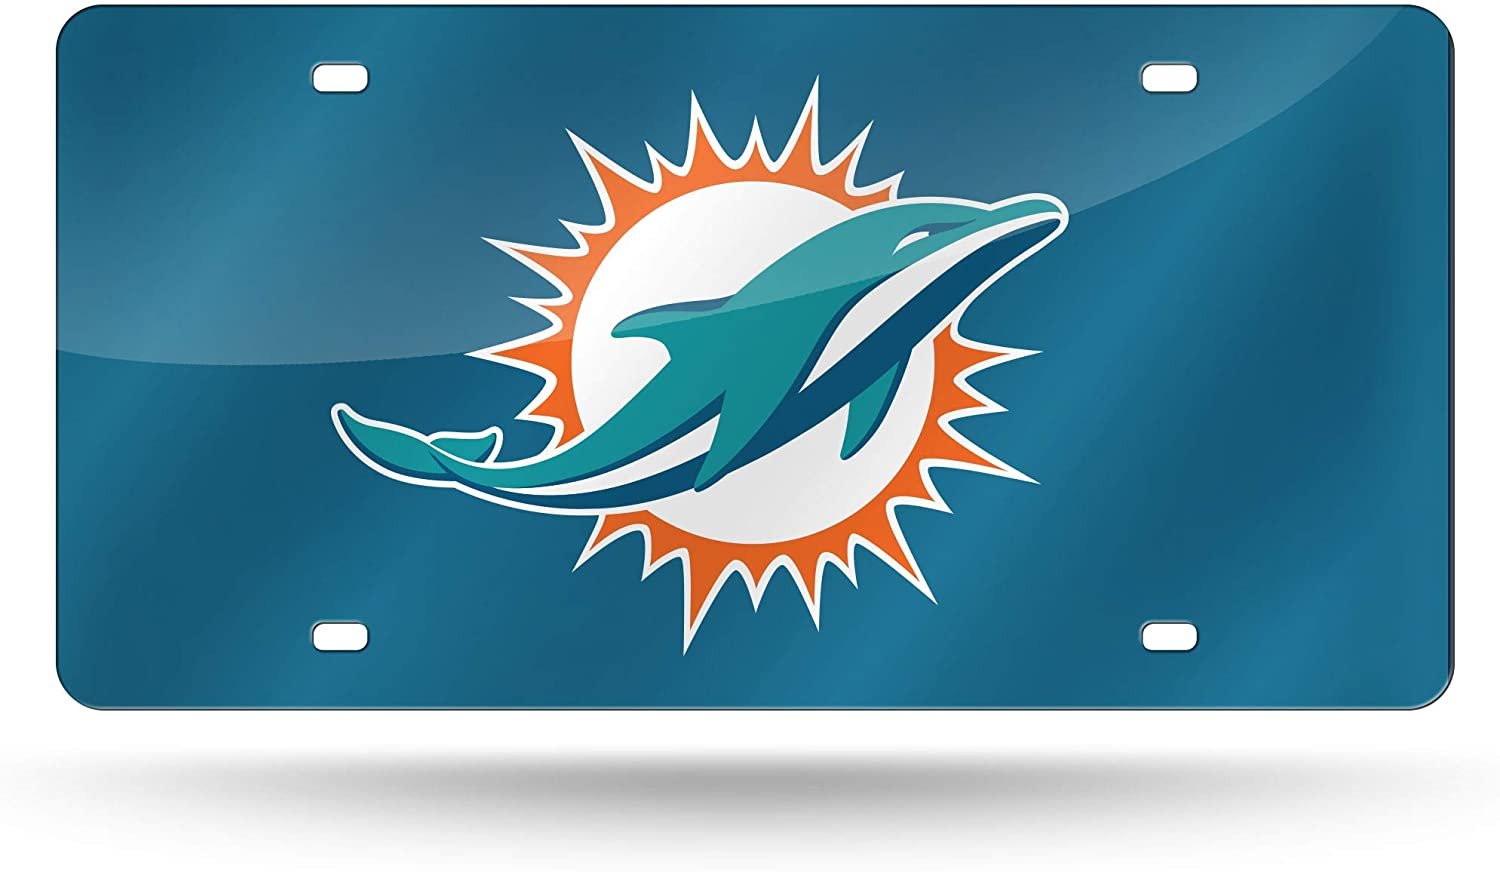 Miami Dolphins Premium Laser Cut Tag License Plate, Blue Mirrored Acrylic Inlaid, 12x6 Inch